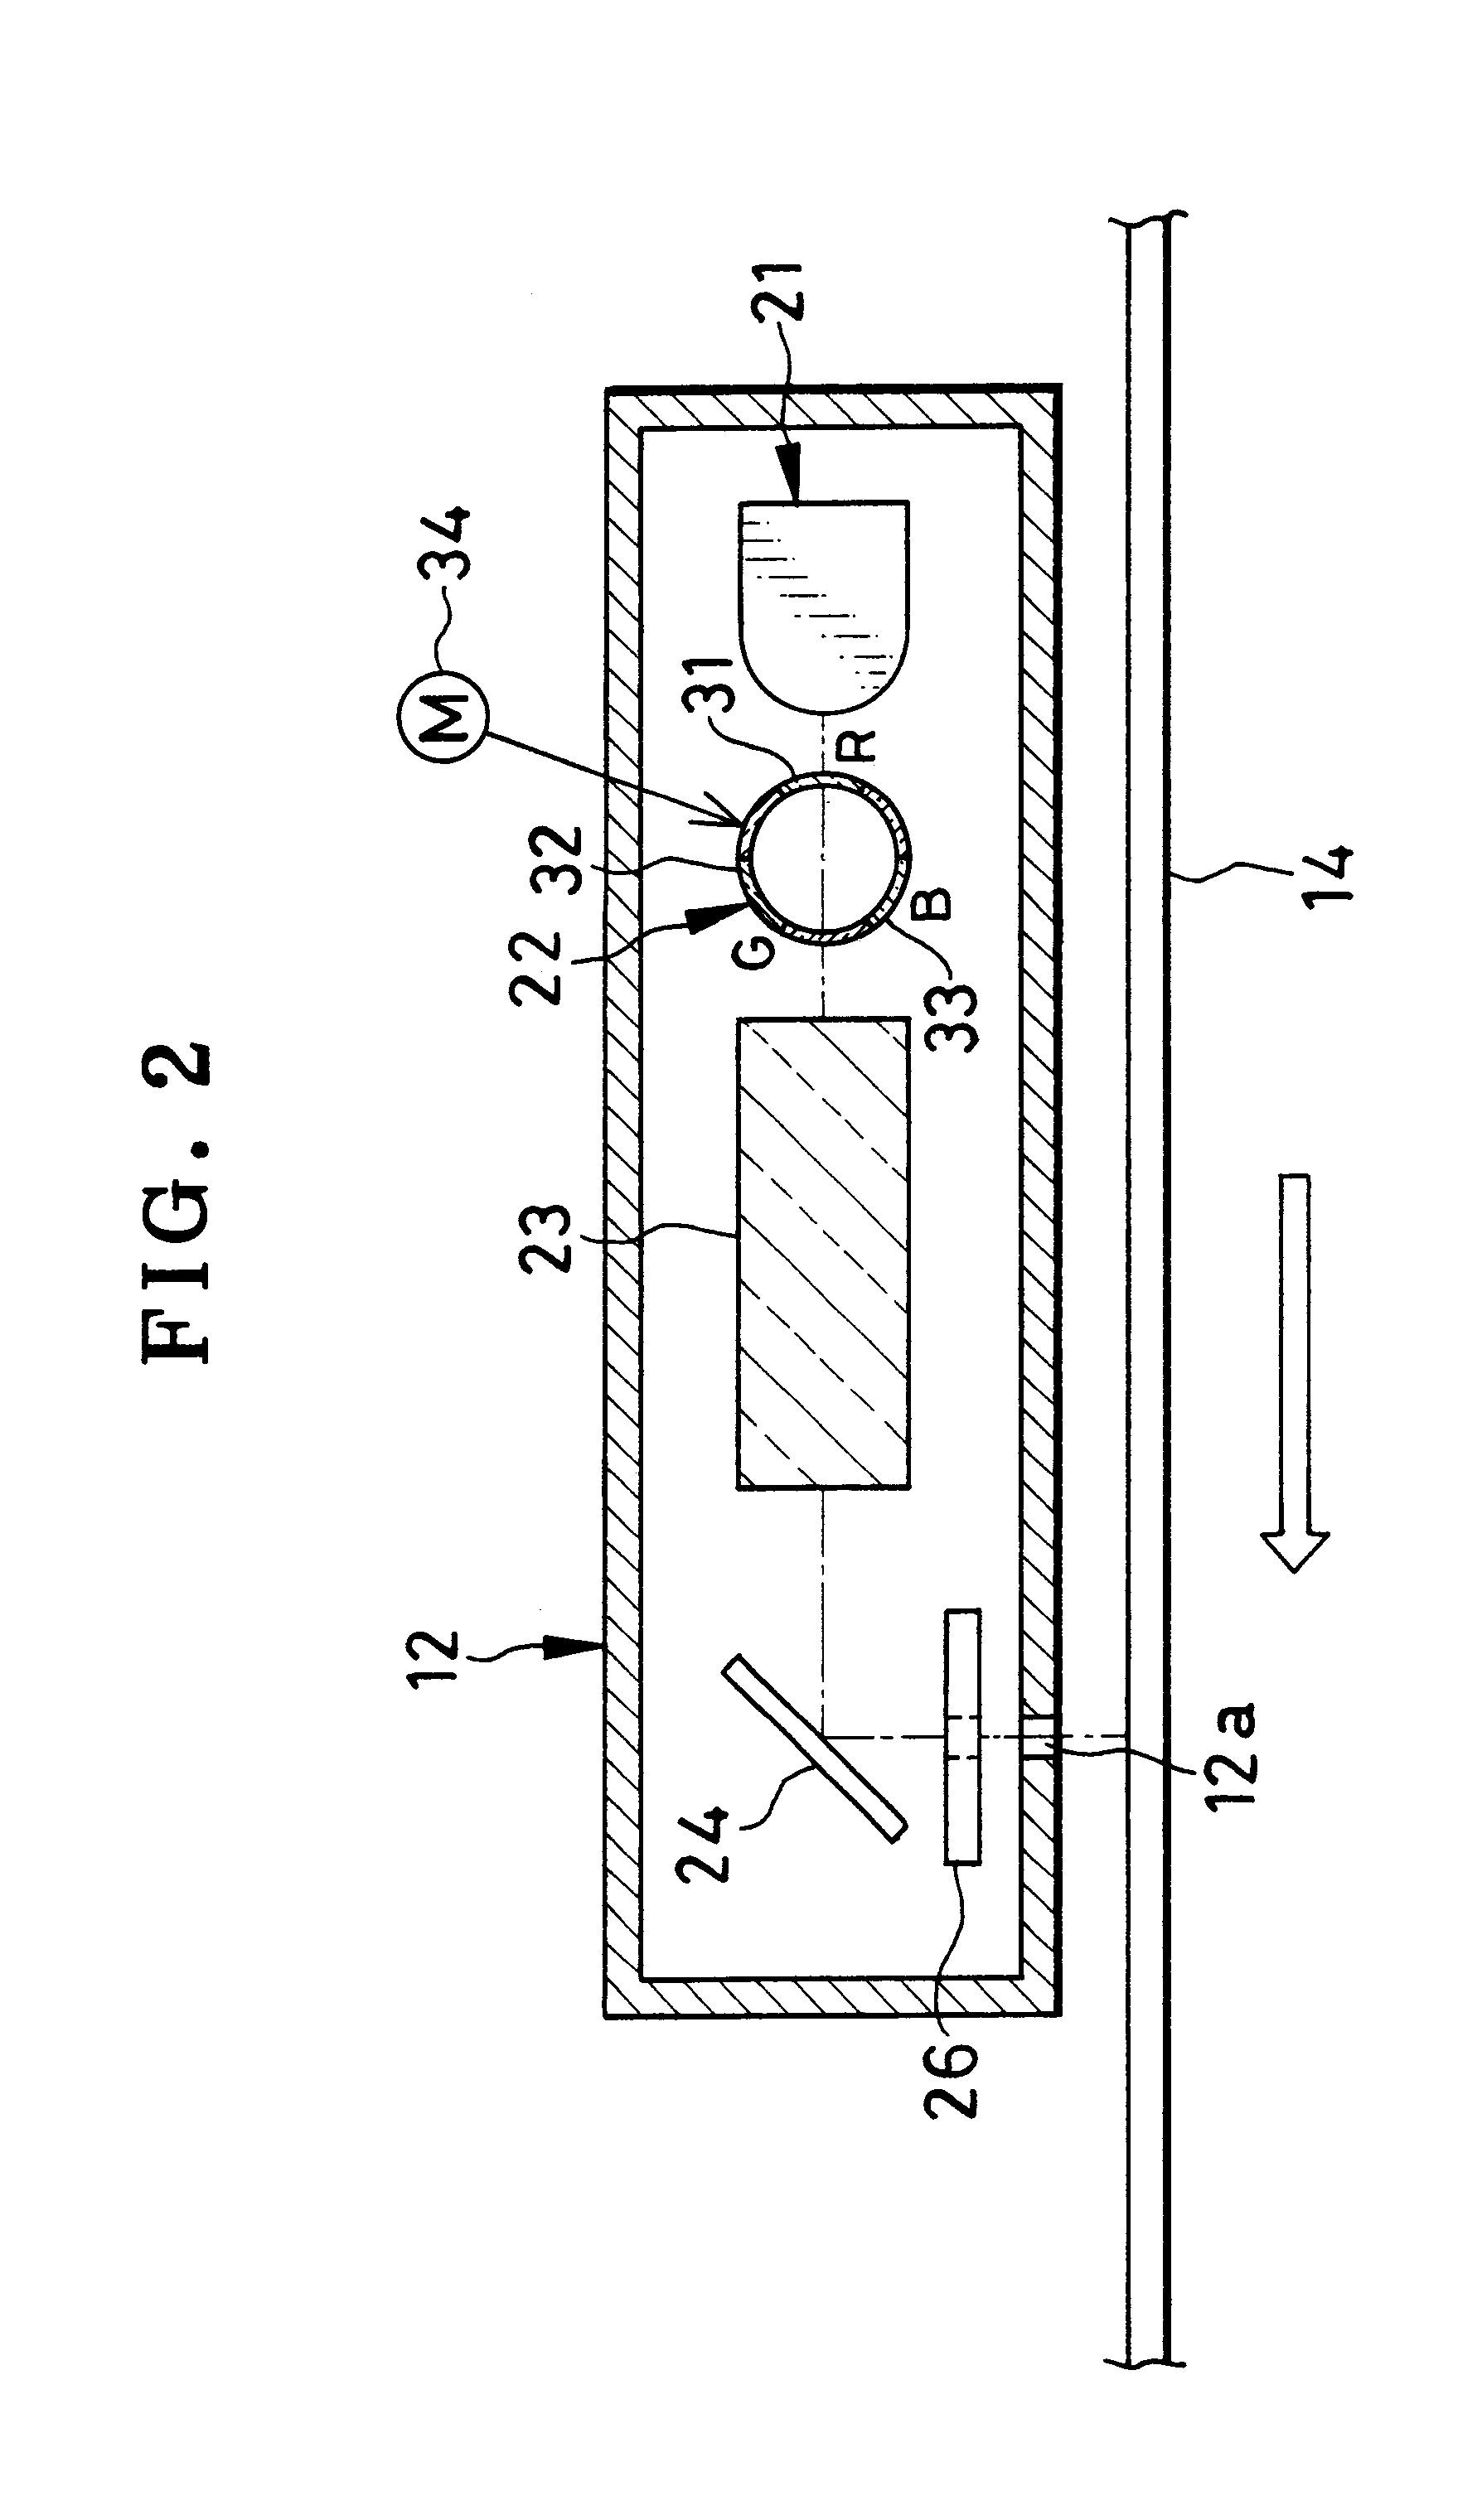 Optical printer with color filter and optical printing method